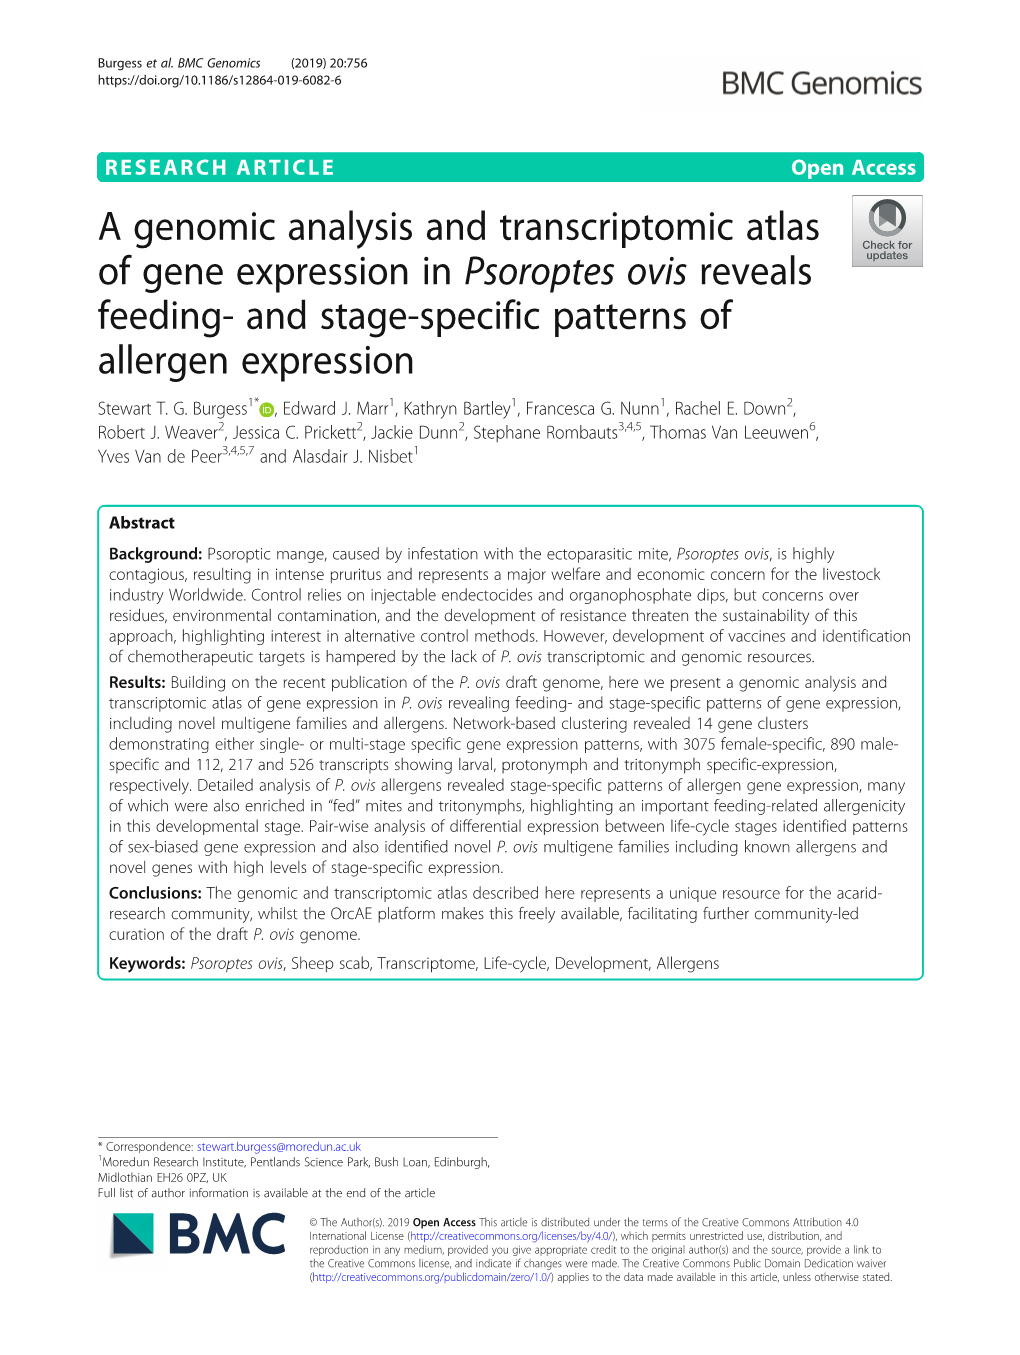 A Genomic Analysis and Transcriptomic Atlas of Gene Expression in Psoroptes Ovis Reveals Feeding- and Stage-Specific Patterns of Allergen Expression Stewart T